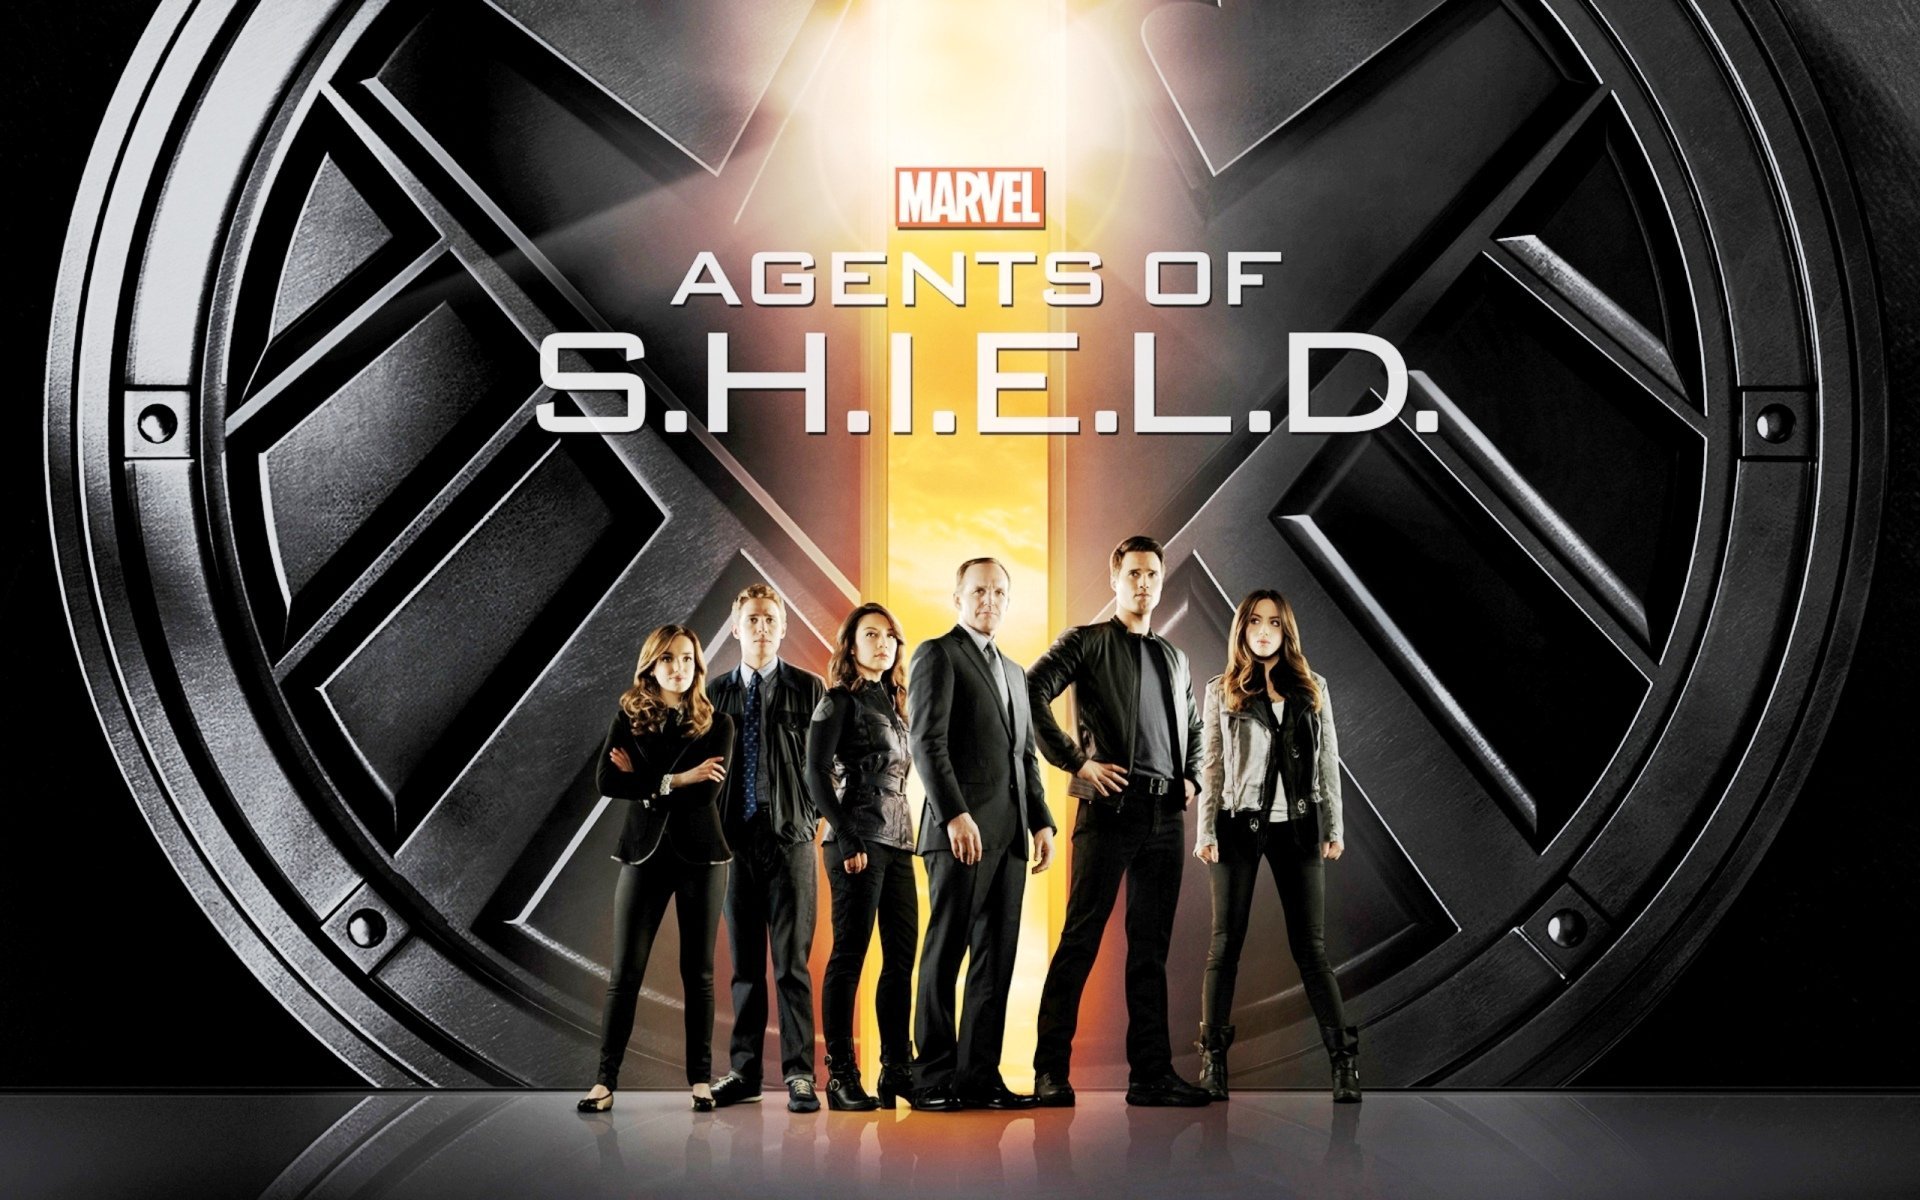 AGENTS OF SHIELD action drama sci fi marvel comic series crime 23